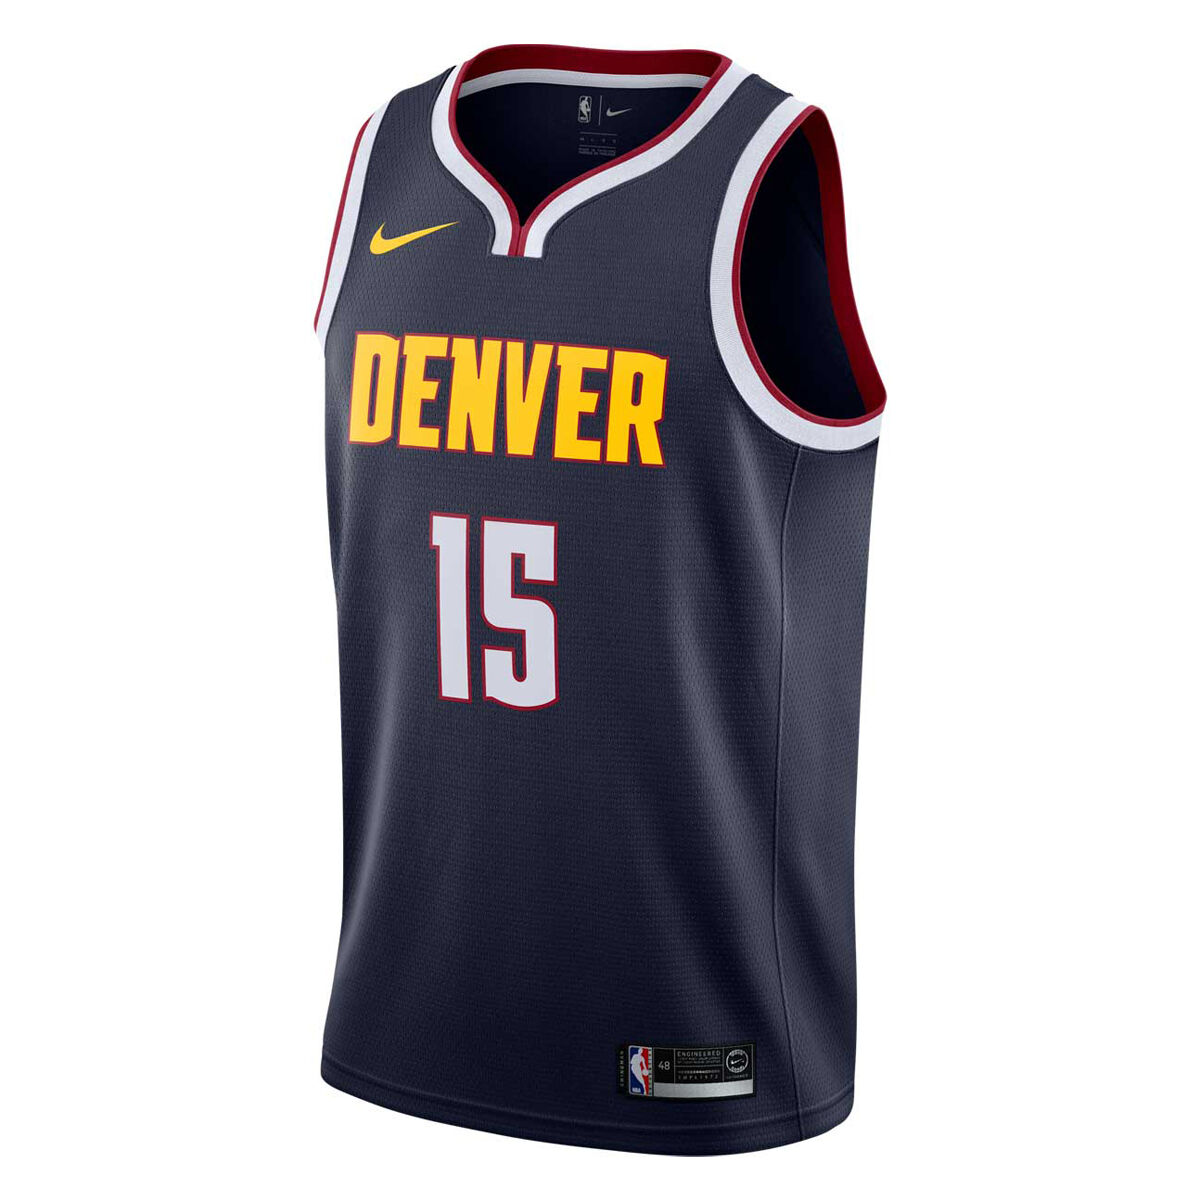 nuggets jersey 2019